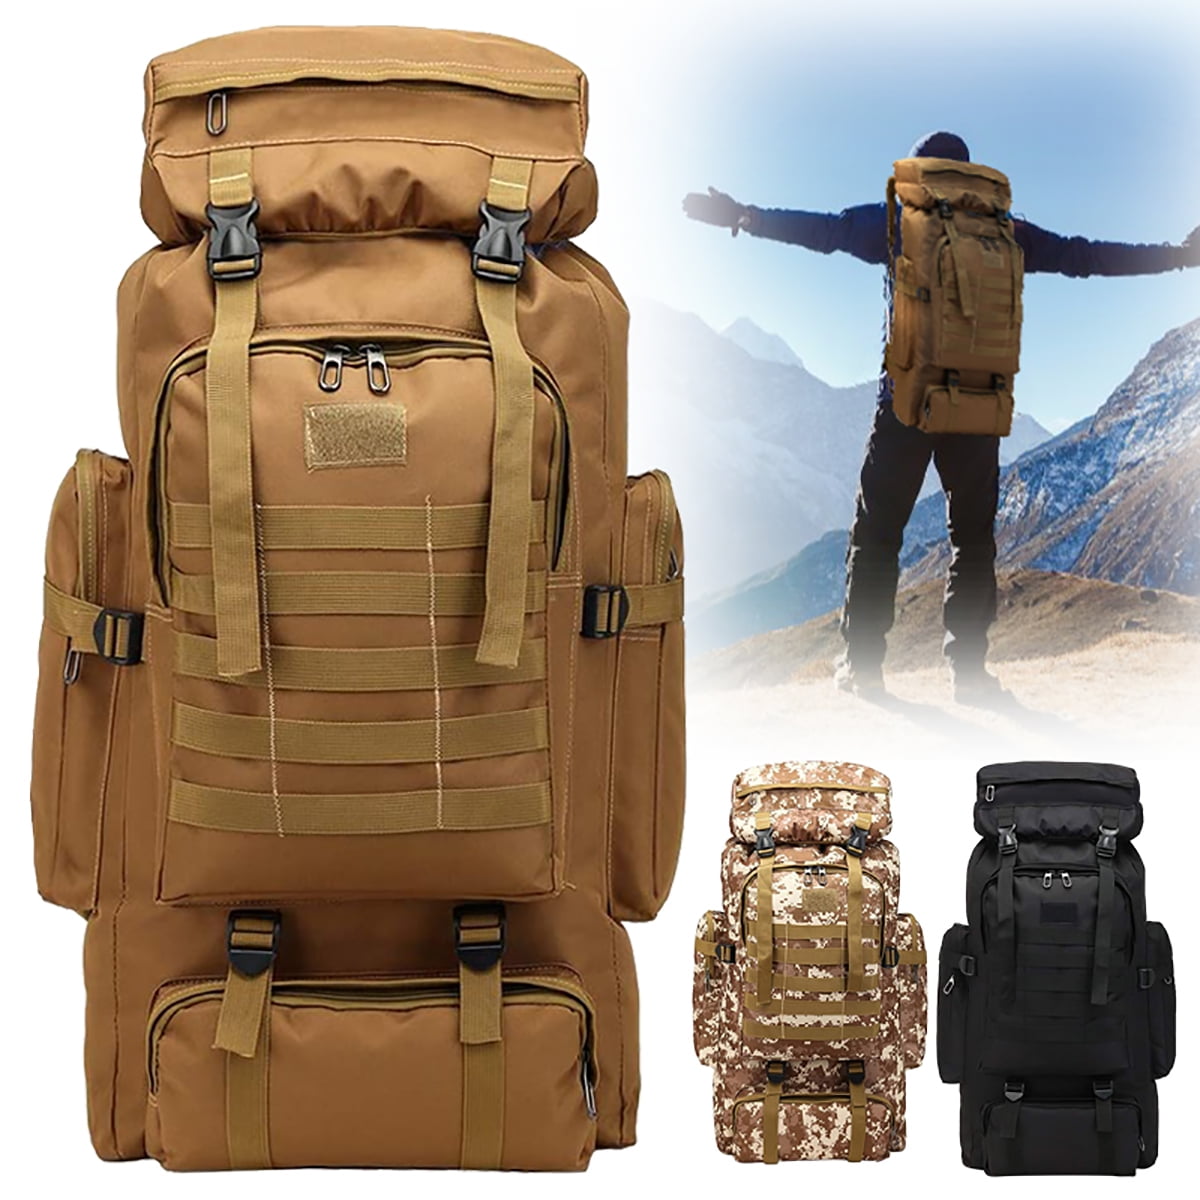 Large 80L Tactical Backpack Rucksack Outdoor Military Camping Hiking Travel  Bag